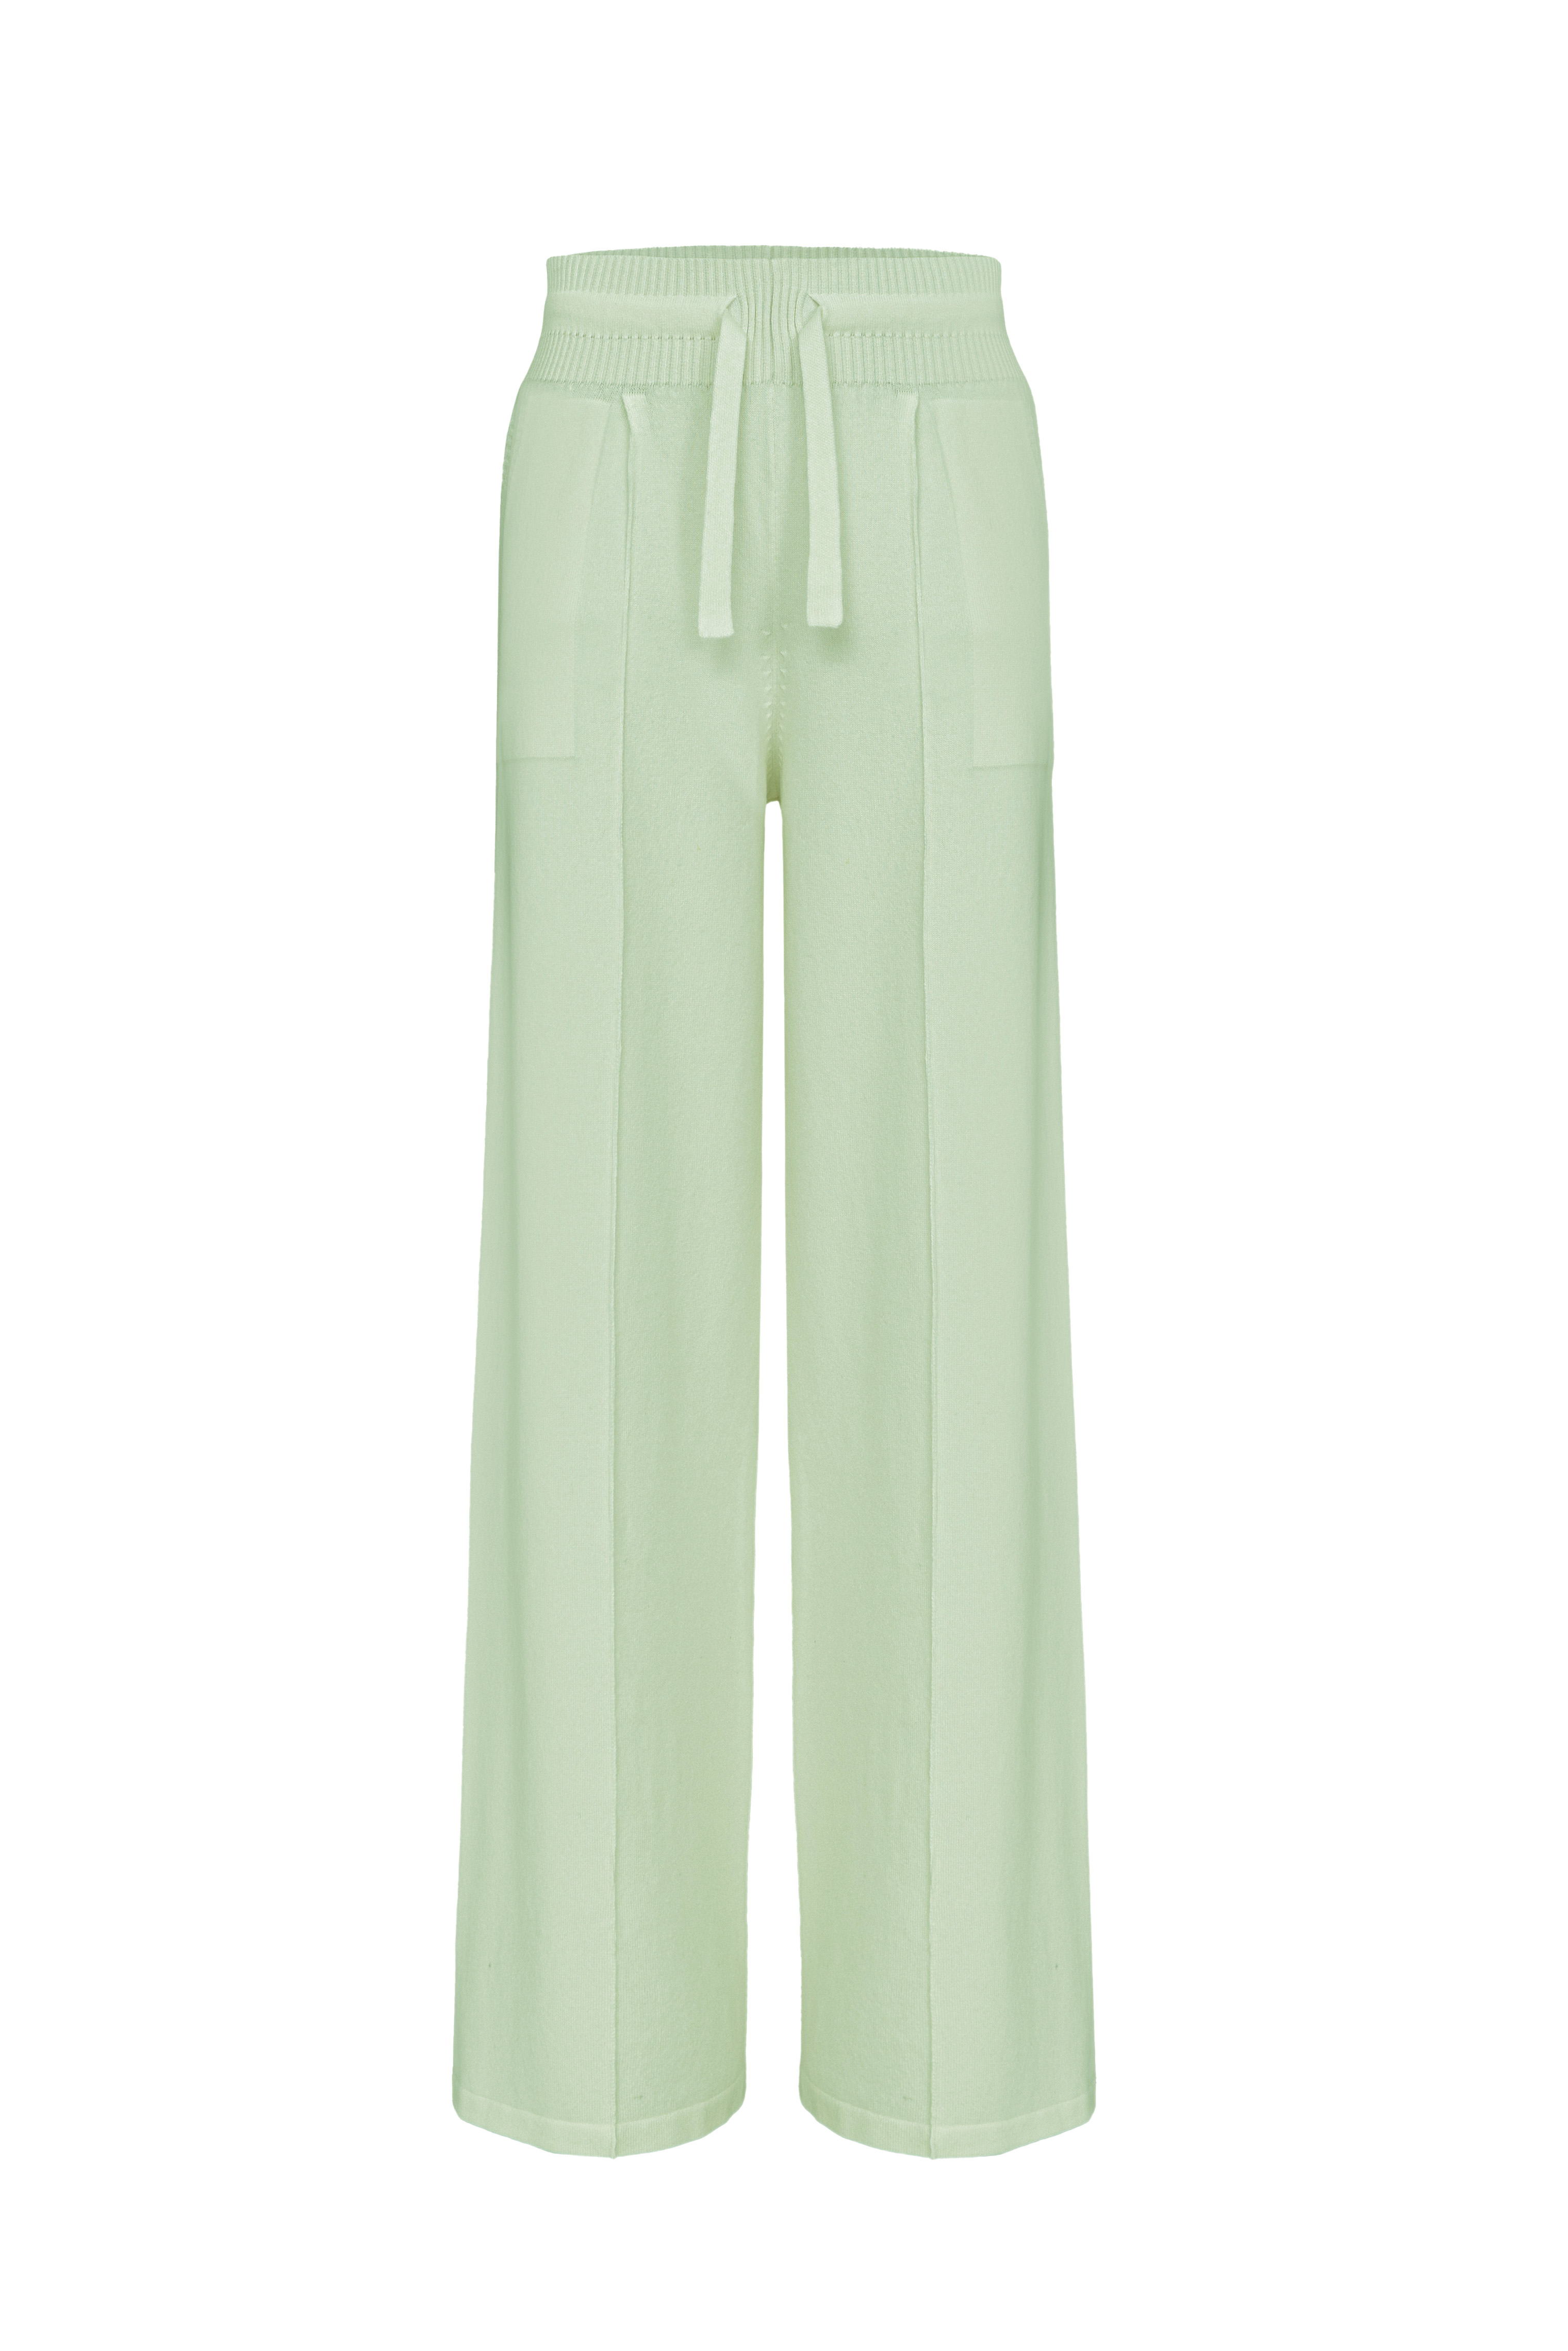 Suit 5033-168 Pale-green from BRUSNiKA